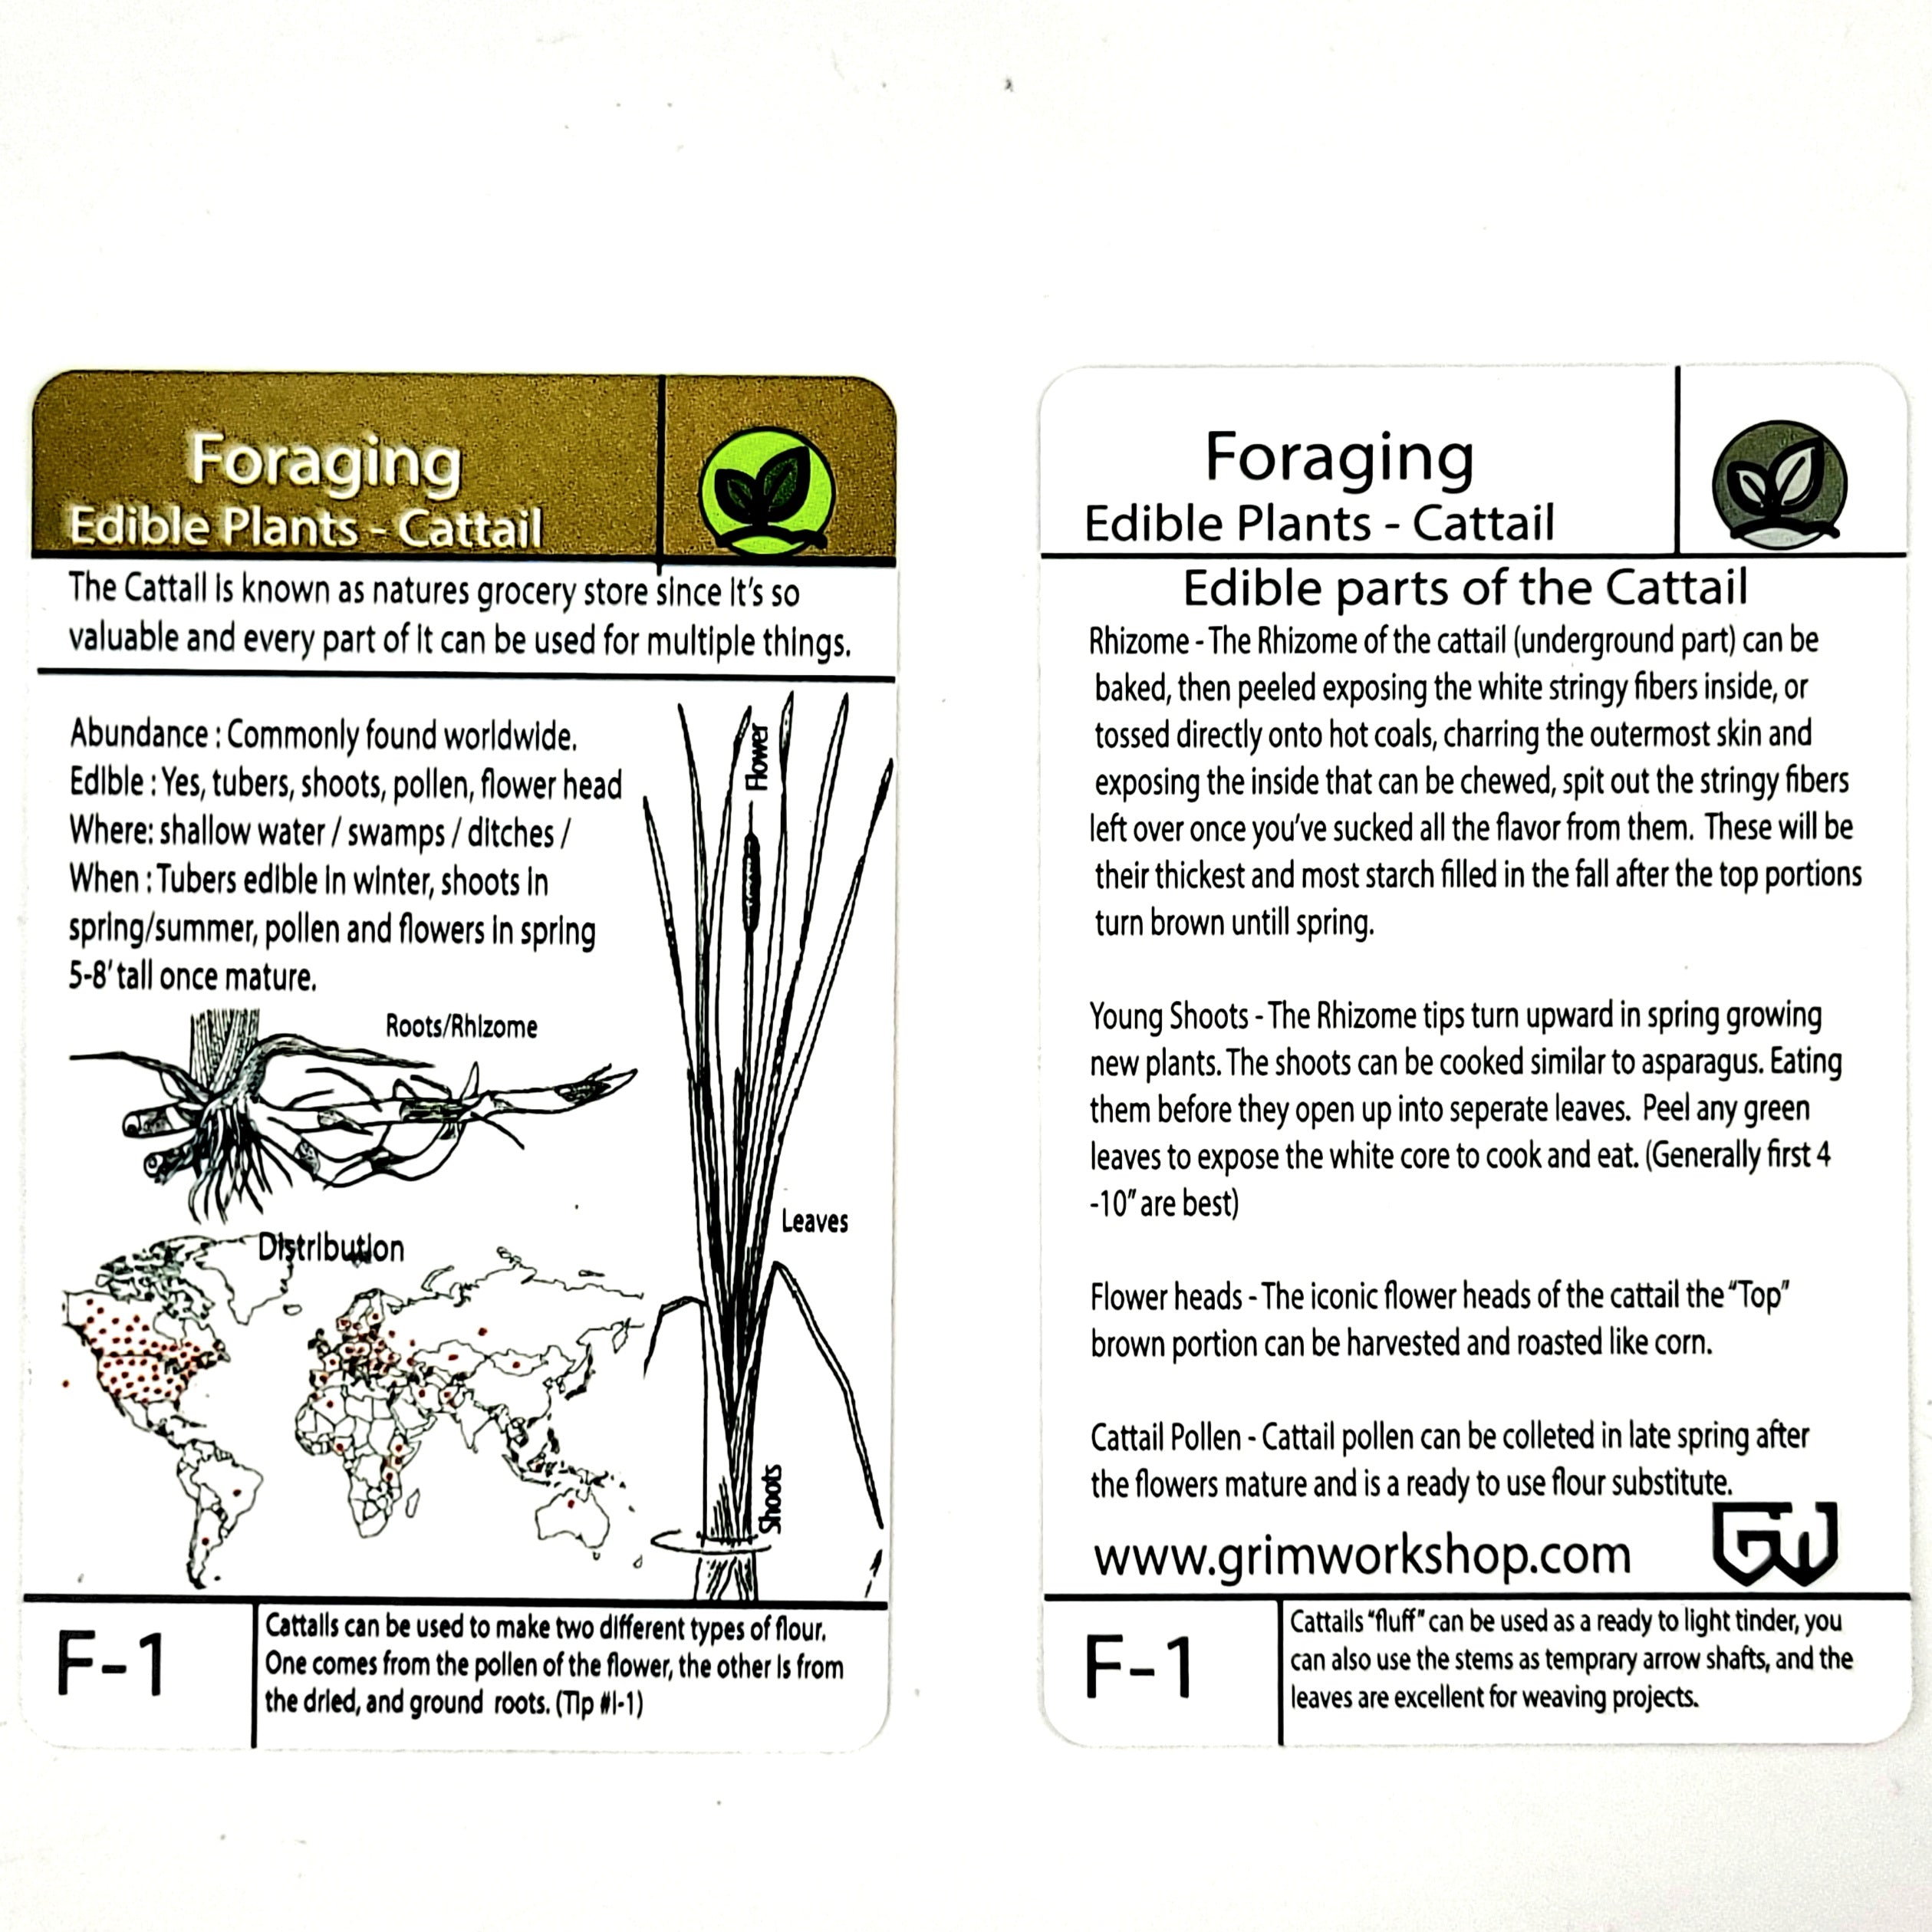 Tip Card Fo-1: Foraging the Cattail Plant Foraging